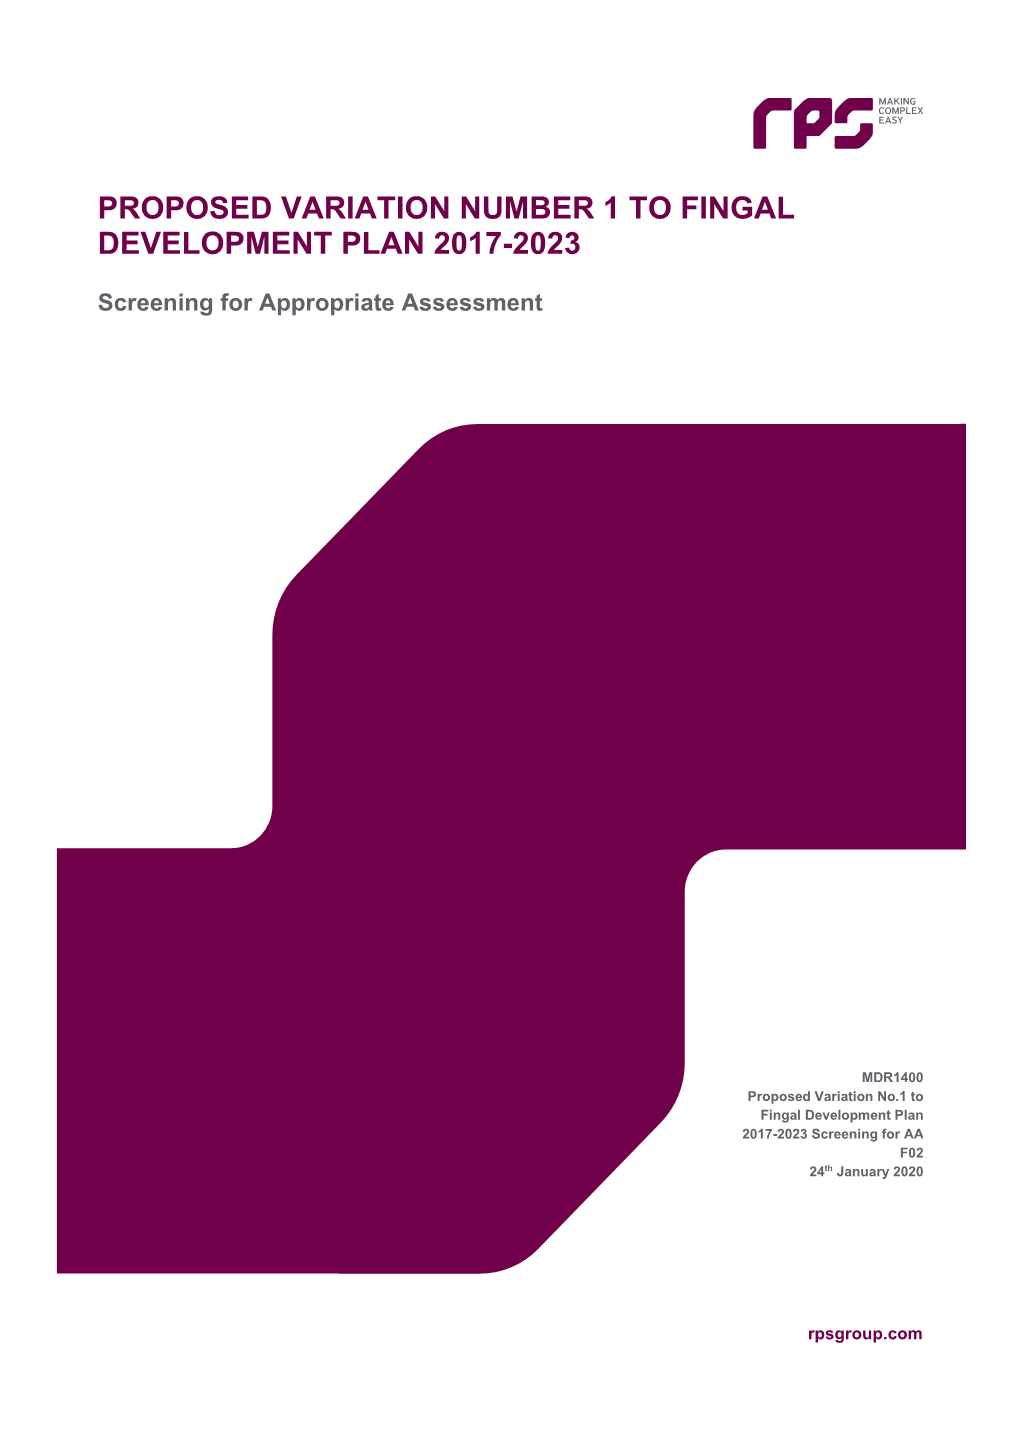 Proposed Variation Number 1 to Fingal Development Plan 2017-2023